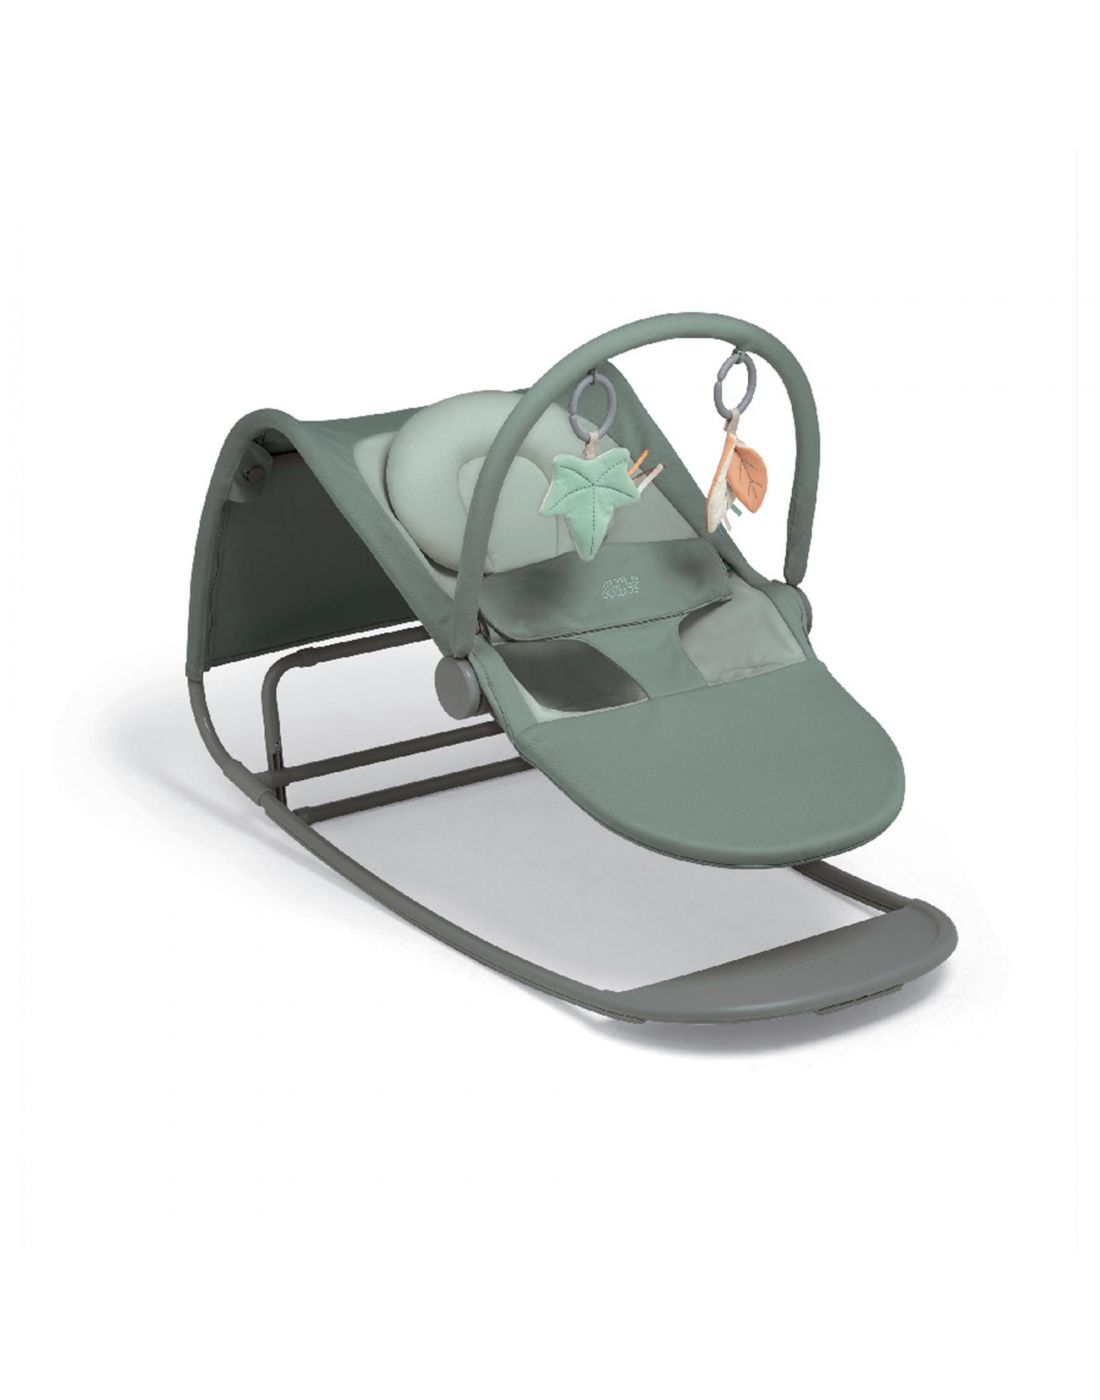 Mamas and Papas Relax Tempo Ivy 3 in 1